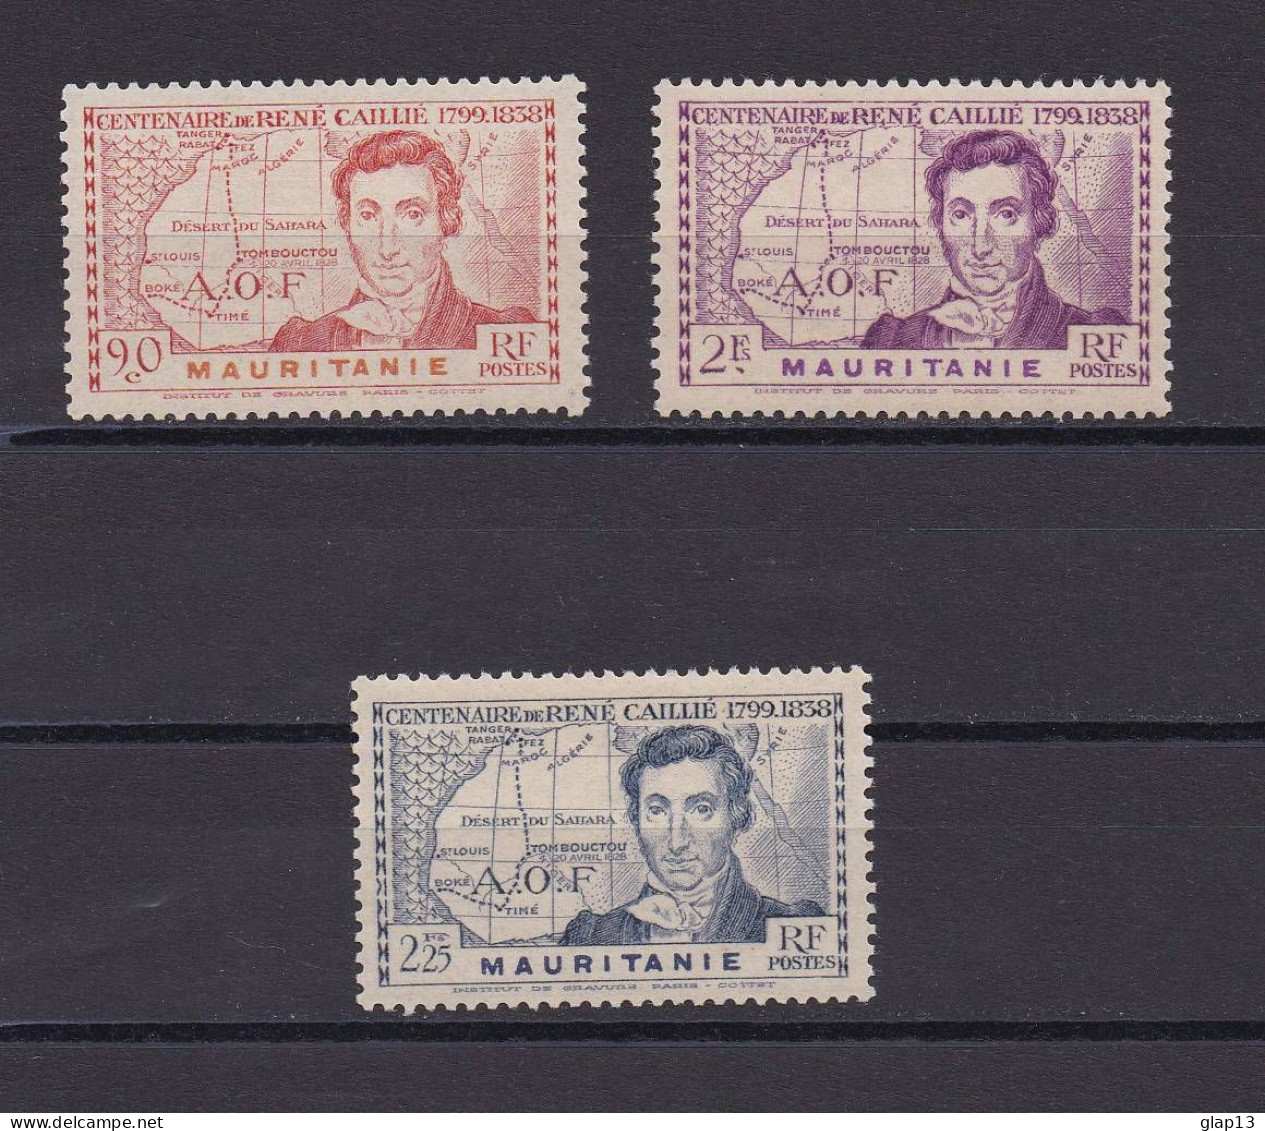 MAURITANIE 1939 TIMBRE N°95/97 NEUF** RENE CAILLIE - Unused Stamps